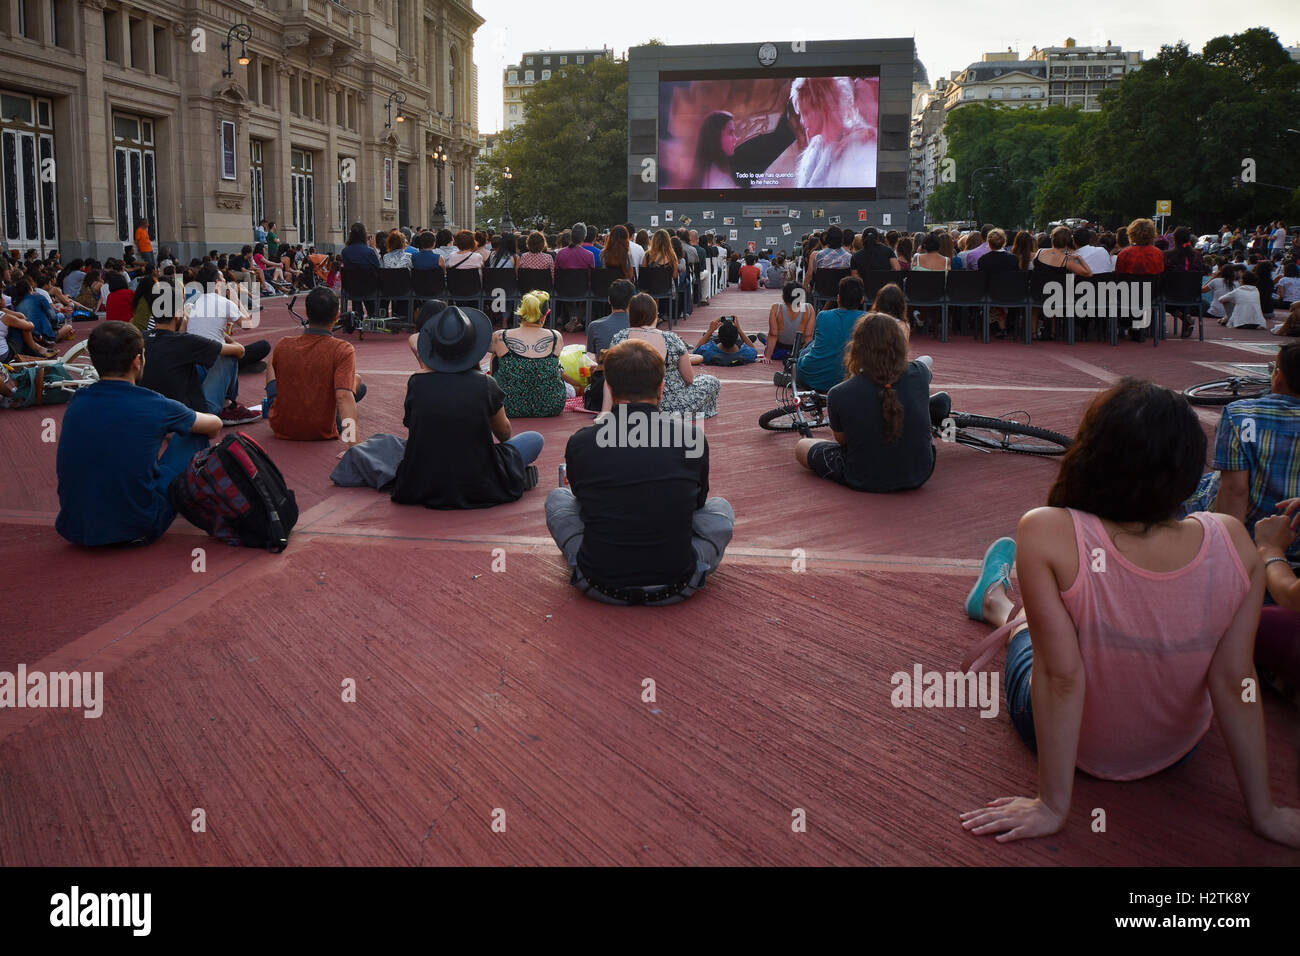 Buenos Aires, Argentina. 13 Jan, 2016. People gather in front of a giant screen during a projection of David Bowie's videos. Stock Photo